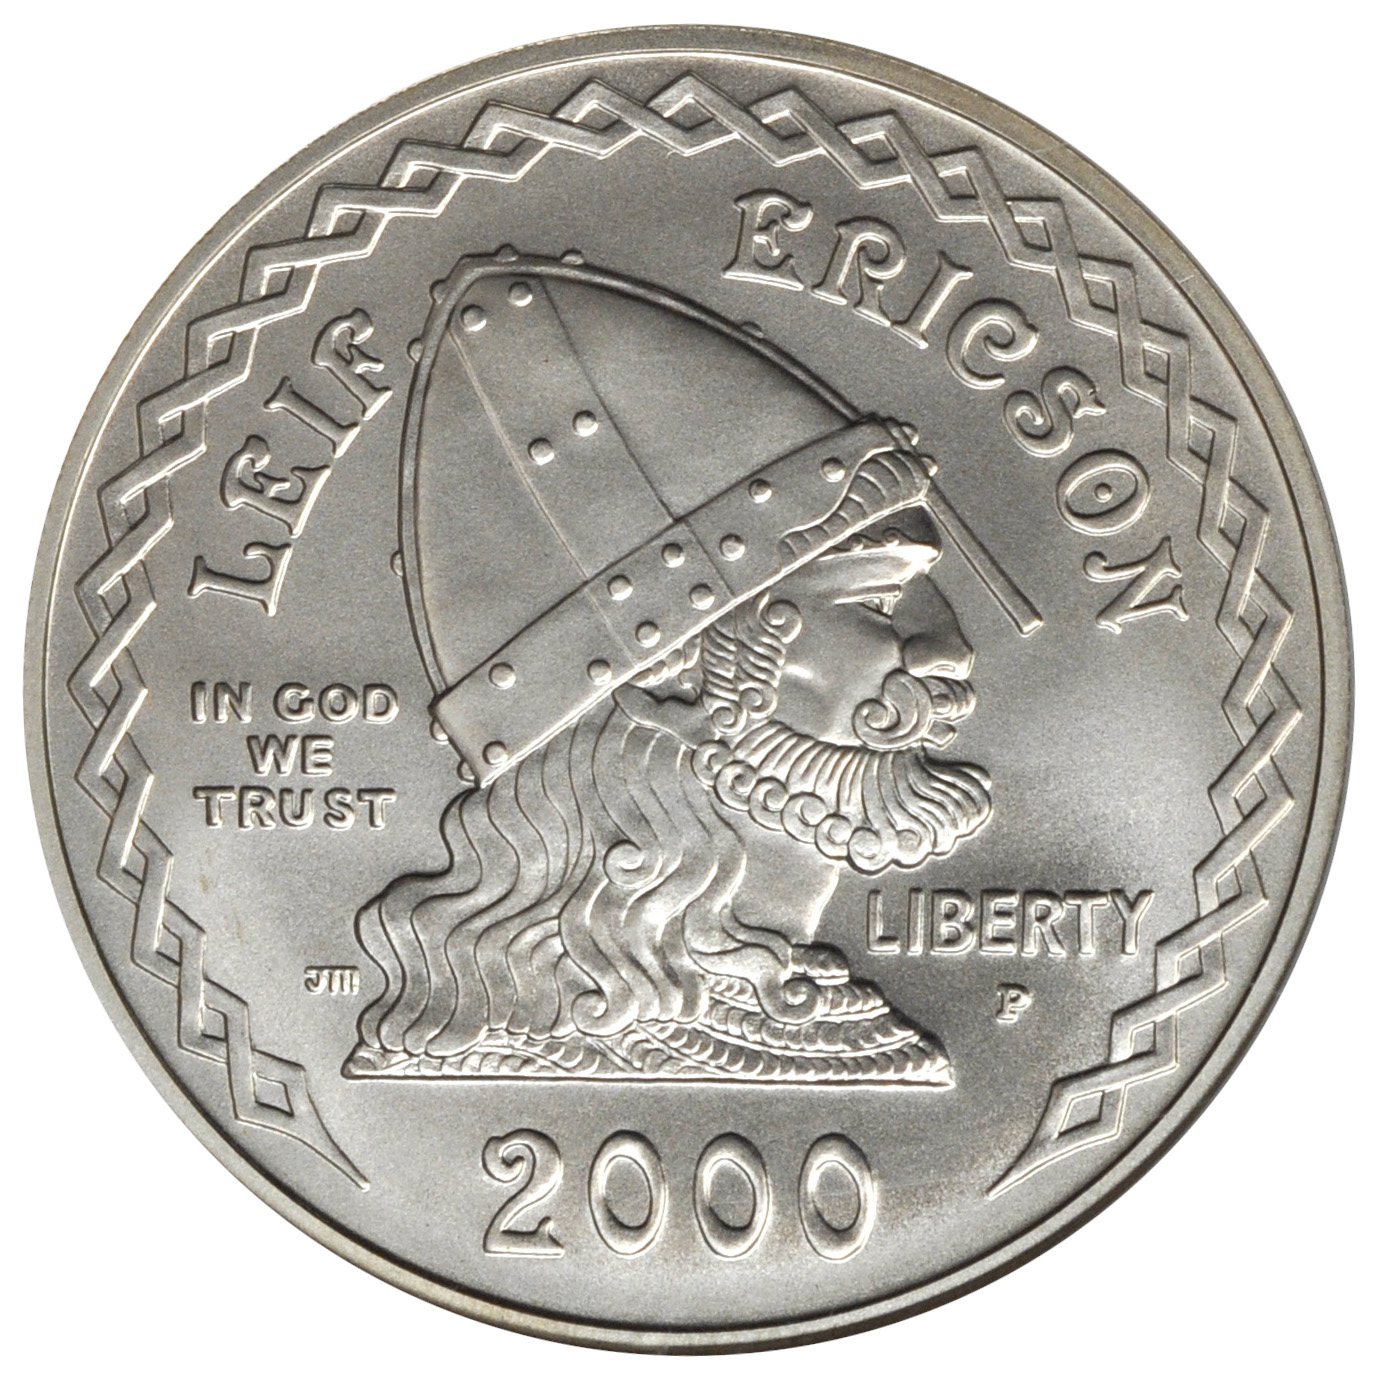 Value of 2000 $1 Leif Ericson Silver Coin | Sell Coins